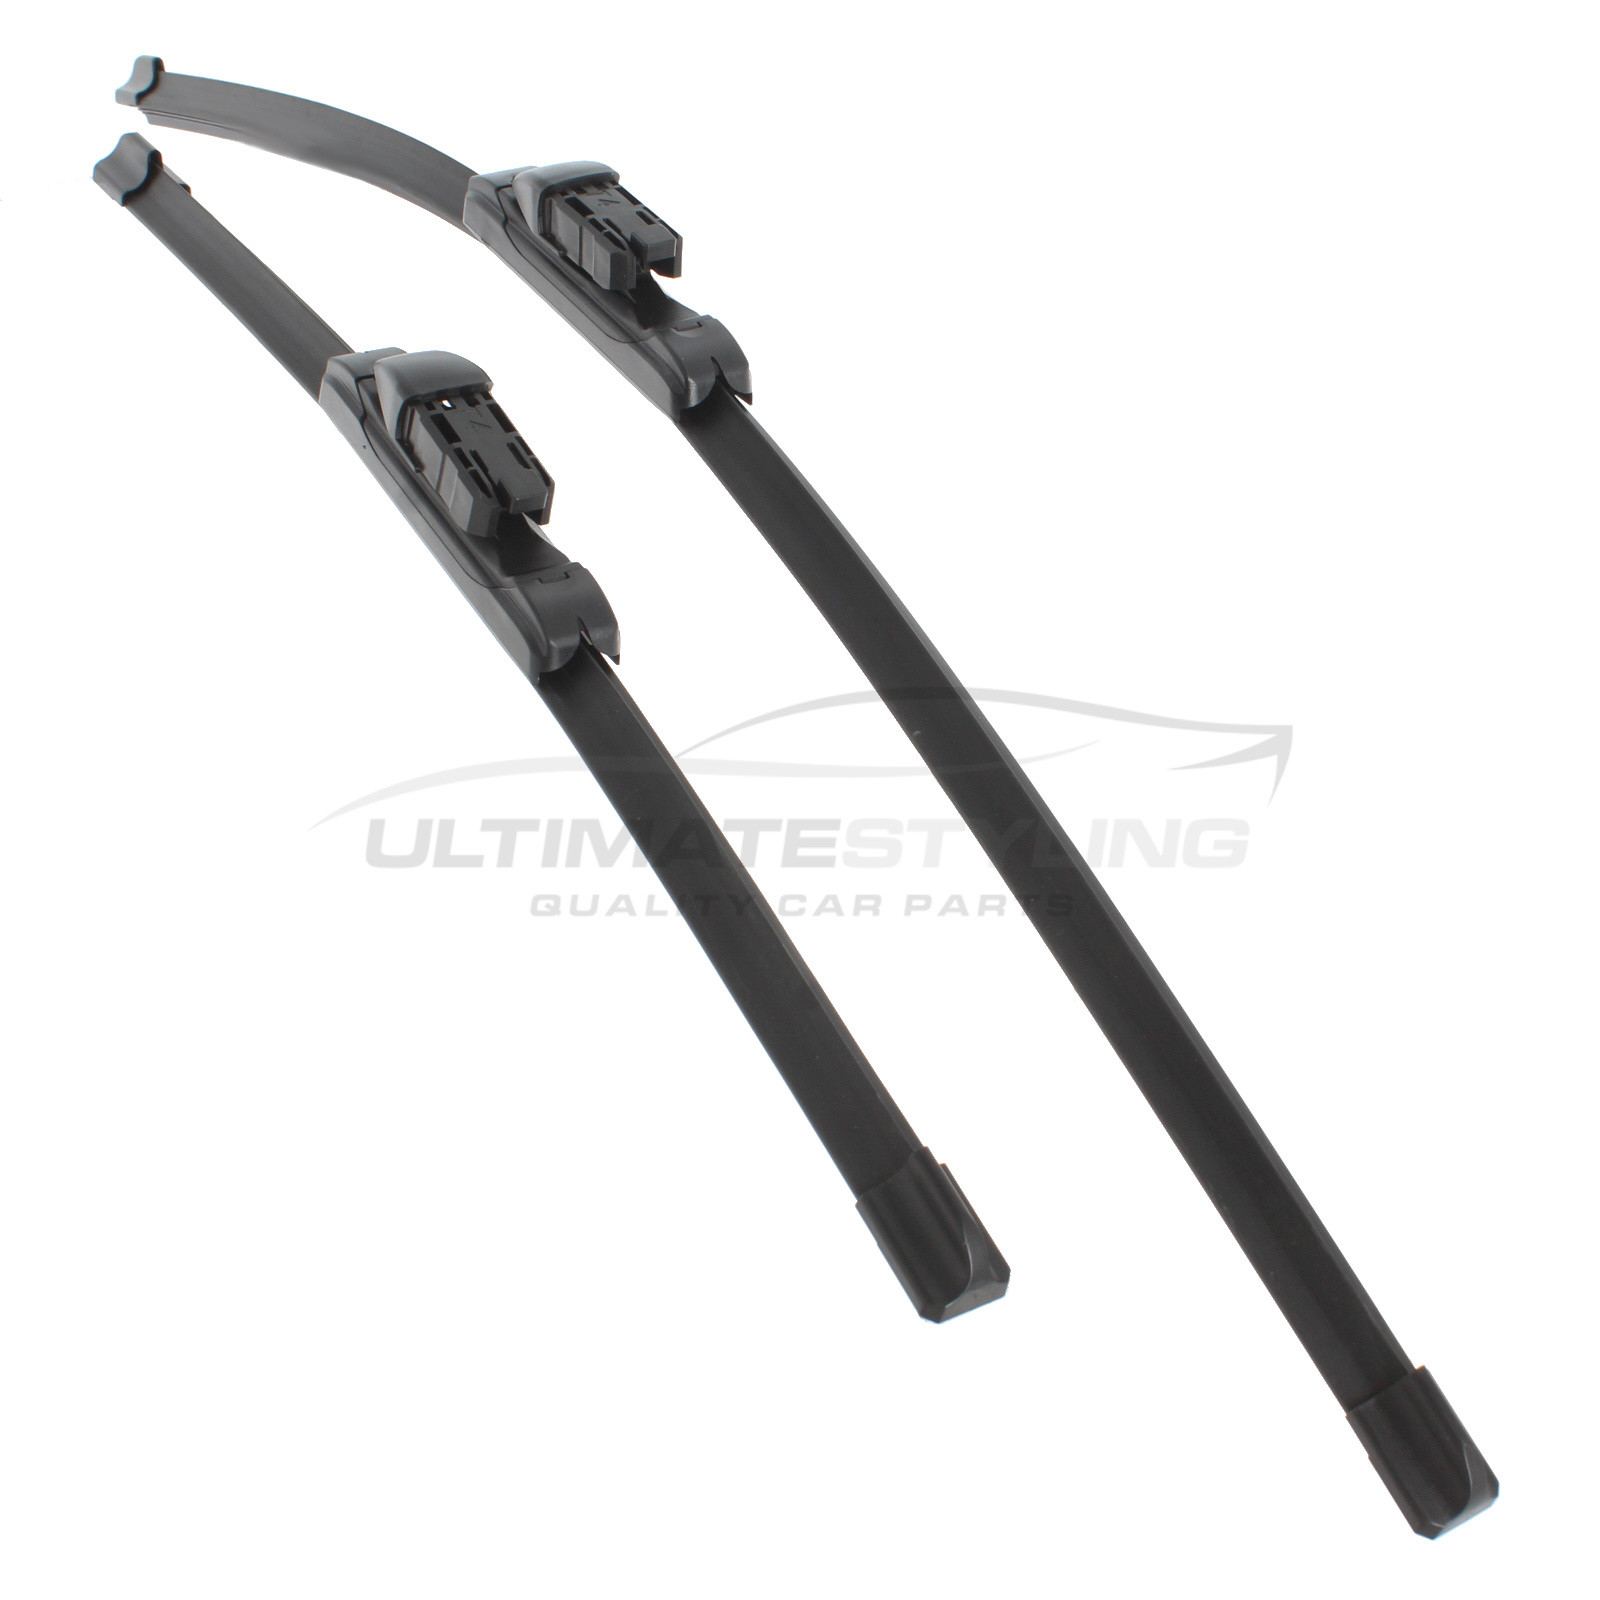 Drivers Side & Passenger Side (Front) Wiper Blades for Vauxhall Adam